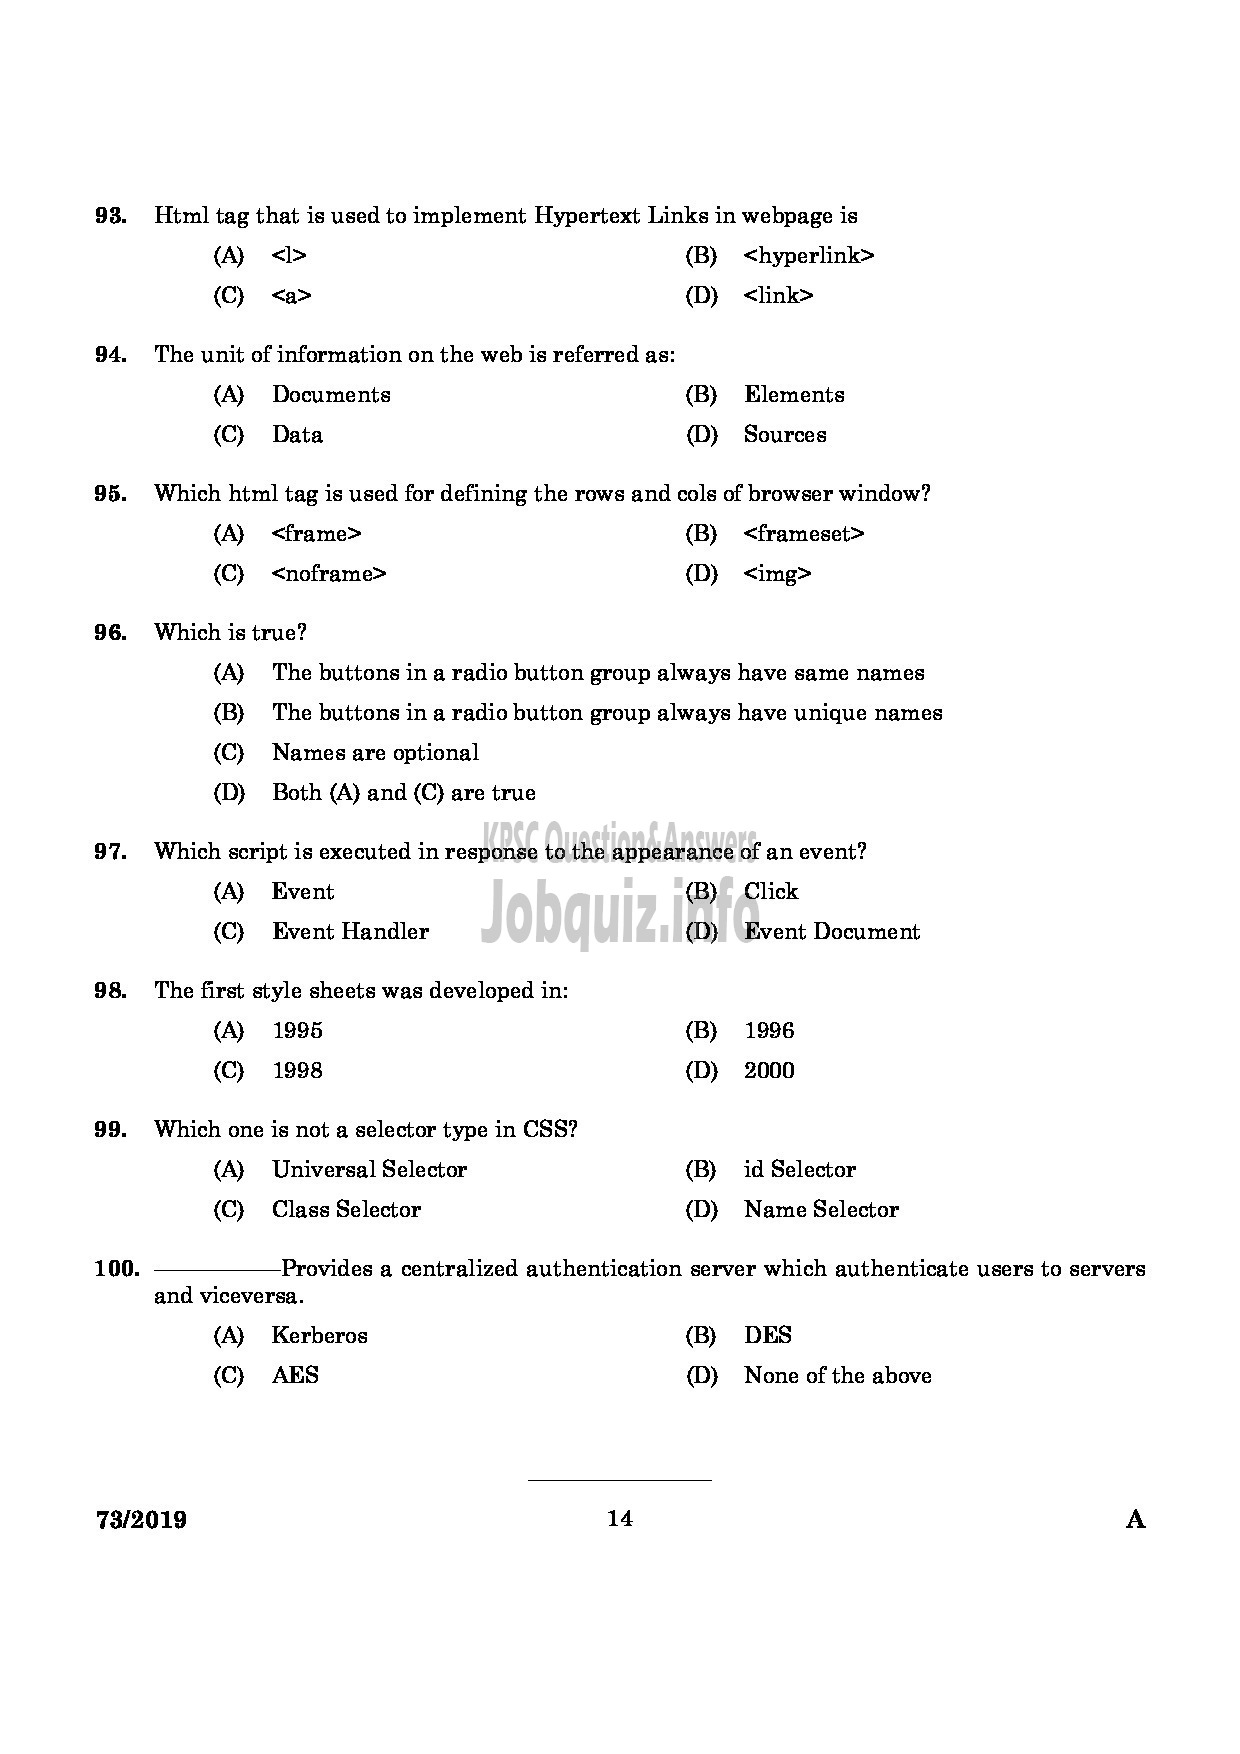 Kerala PSC Question Paper - Junior Instructor (Multimedia Animation And Special Effects) In Industrial Deve Dept English -12